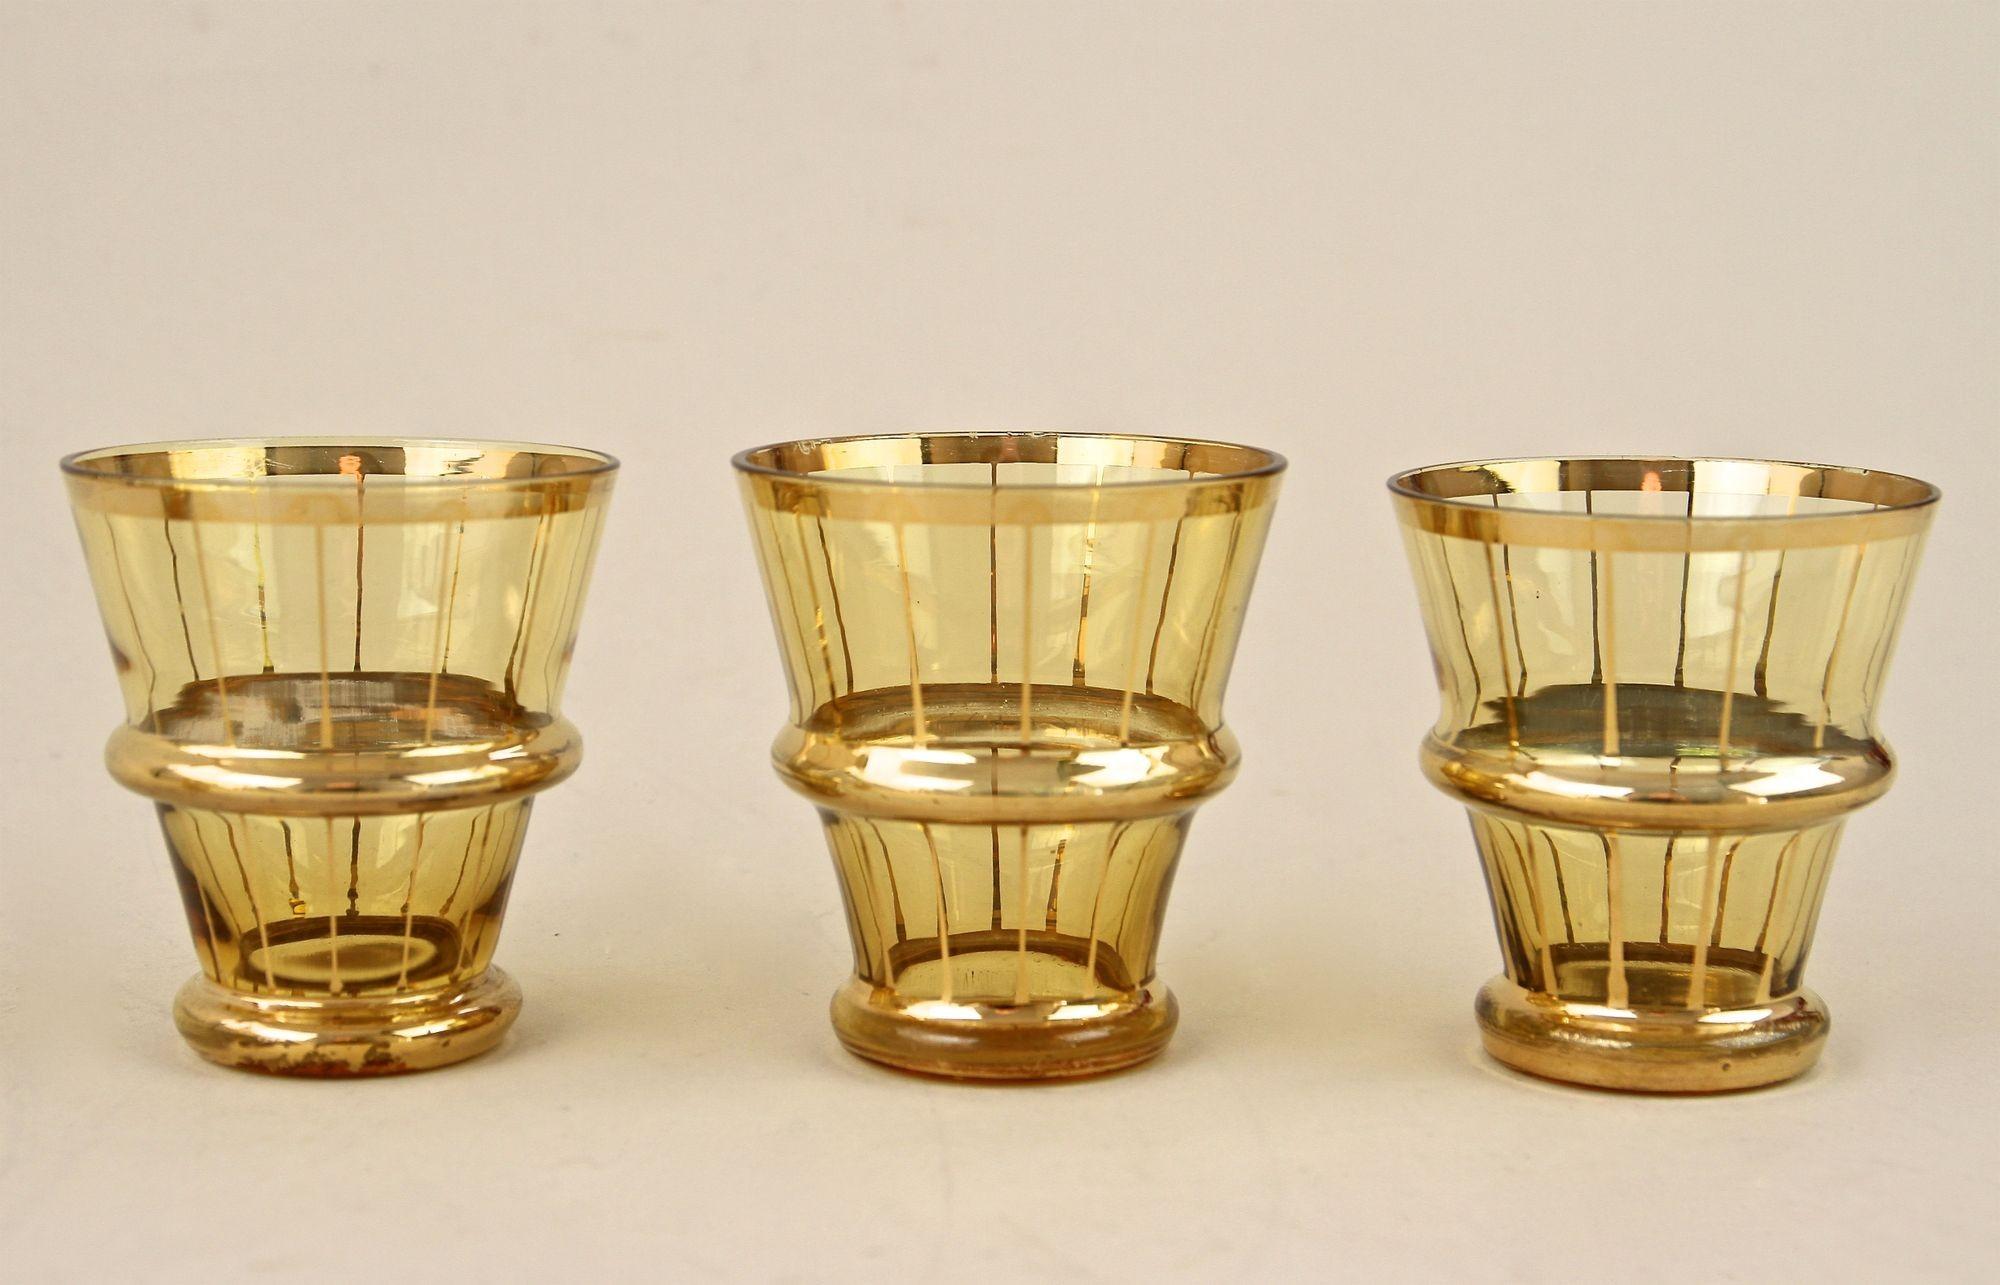 Amber Colored Gilt Art Deco Glass Decanter Set with 6 Shot Glasses, CZ ca. 1920 For Sale 9